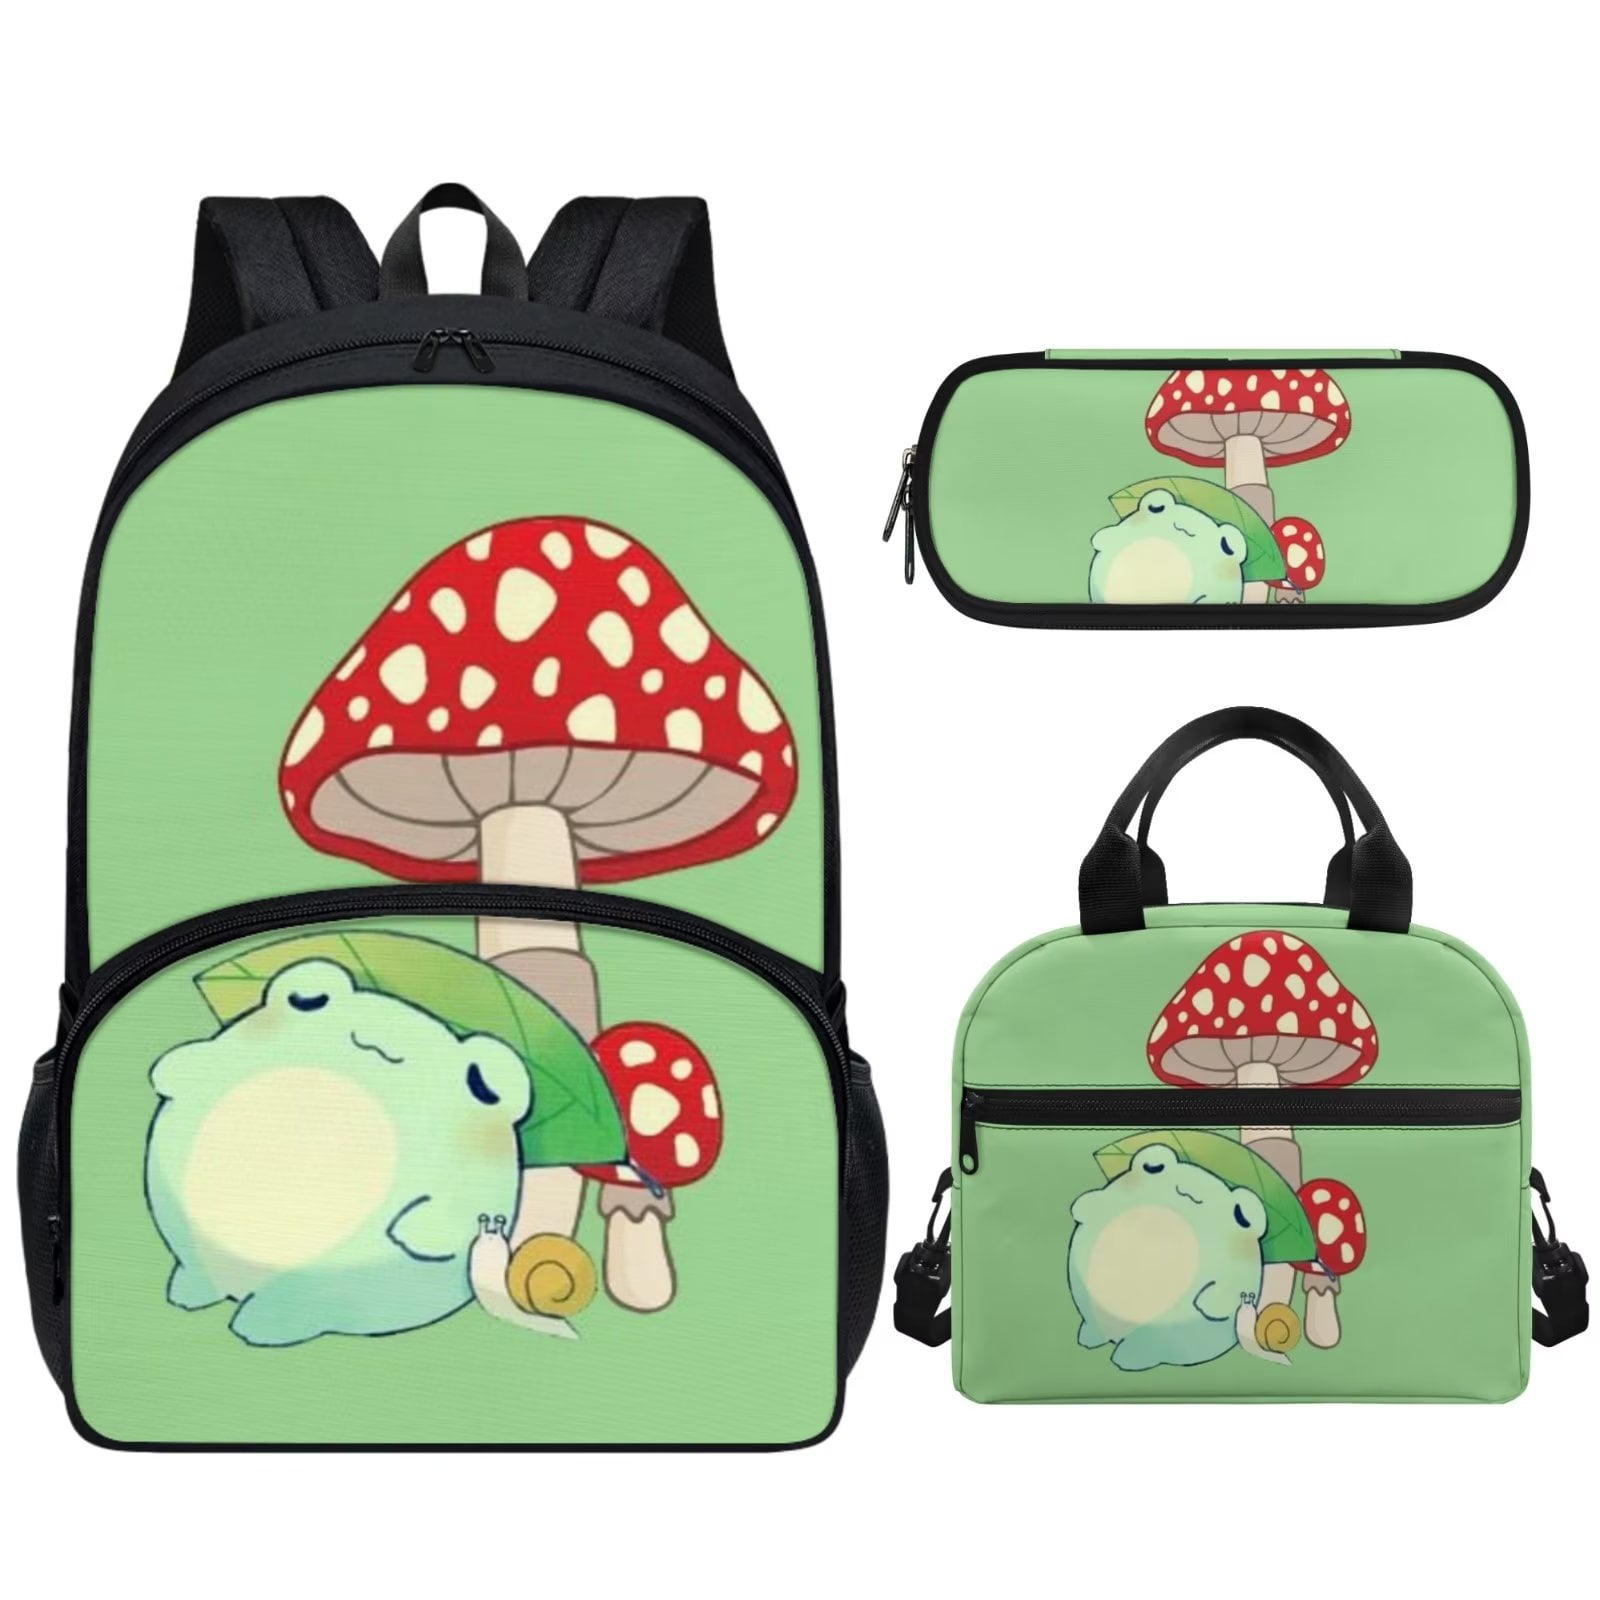  Gomyblomy Mushrooms Moon Butterflies Women & Girls Insulated  Lunch Box, Leak-Proof Lunch Tote, Reusable Lunch Carry Bag for Office and  School, Lunch Accessories: Home & Kitchen